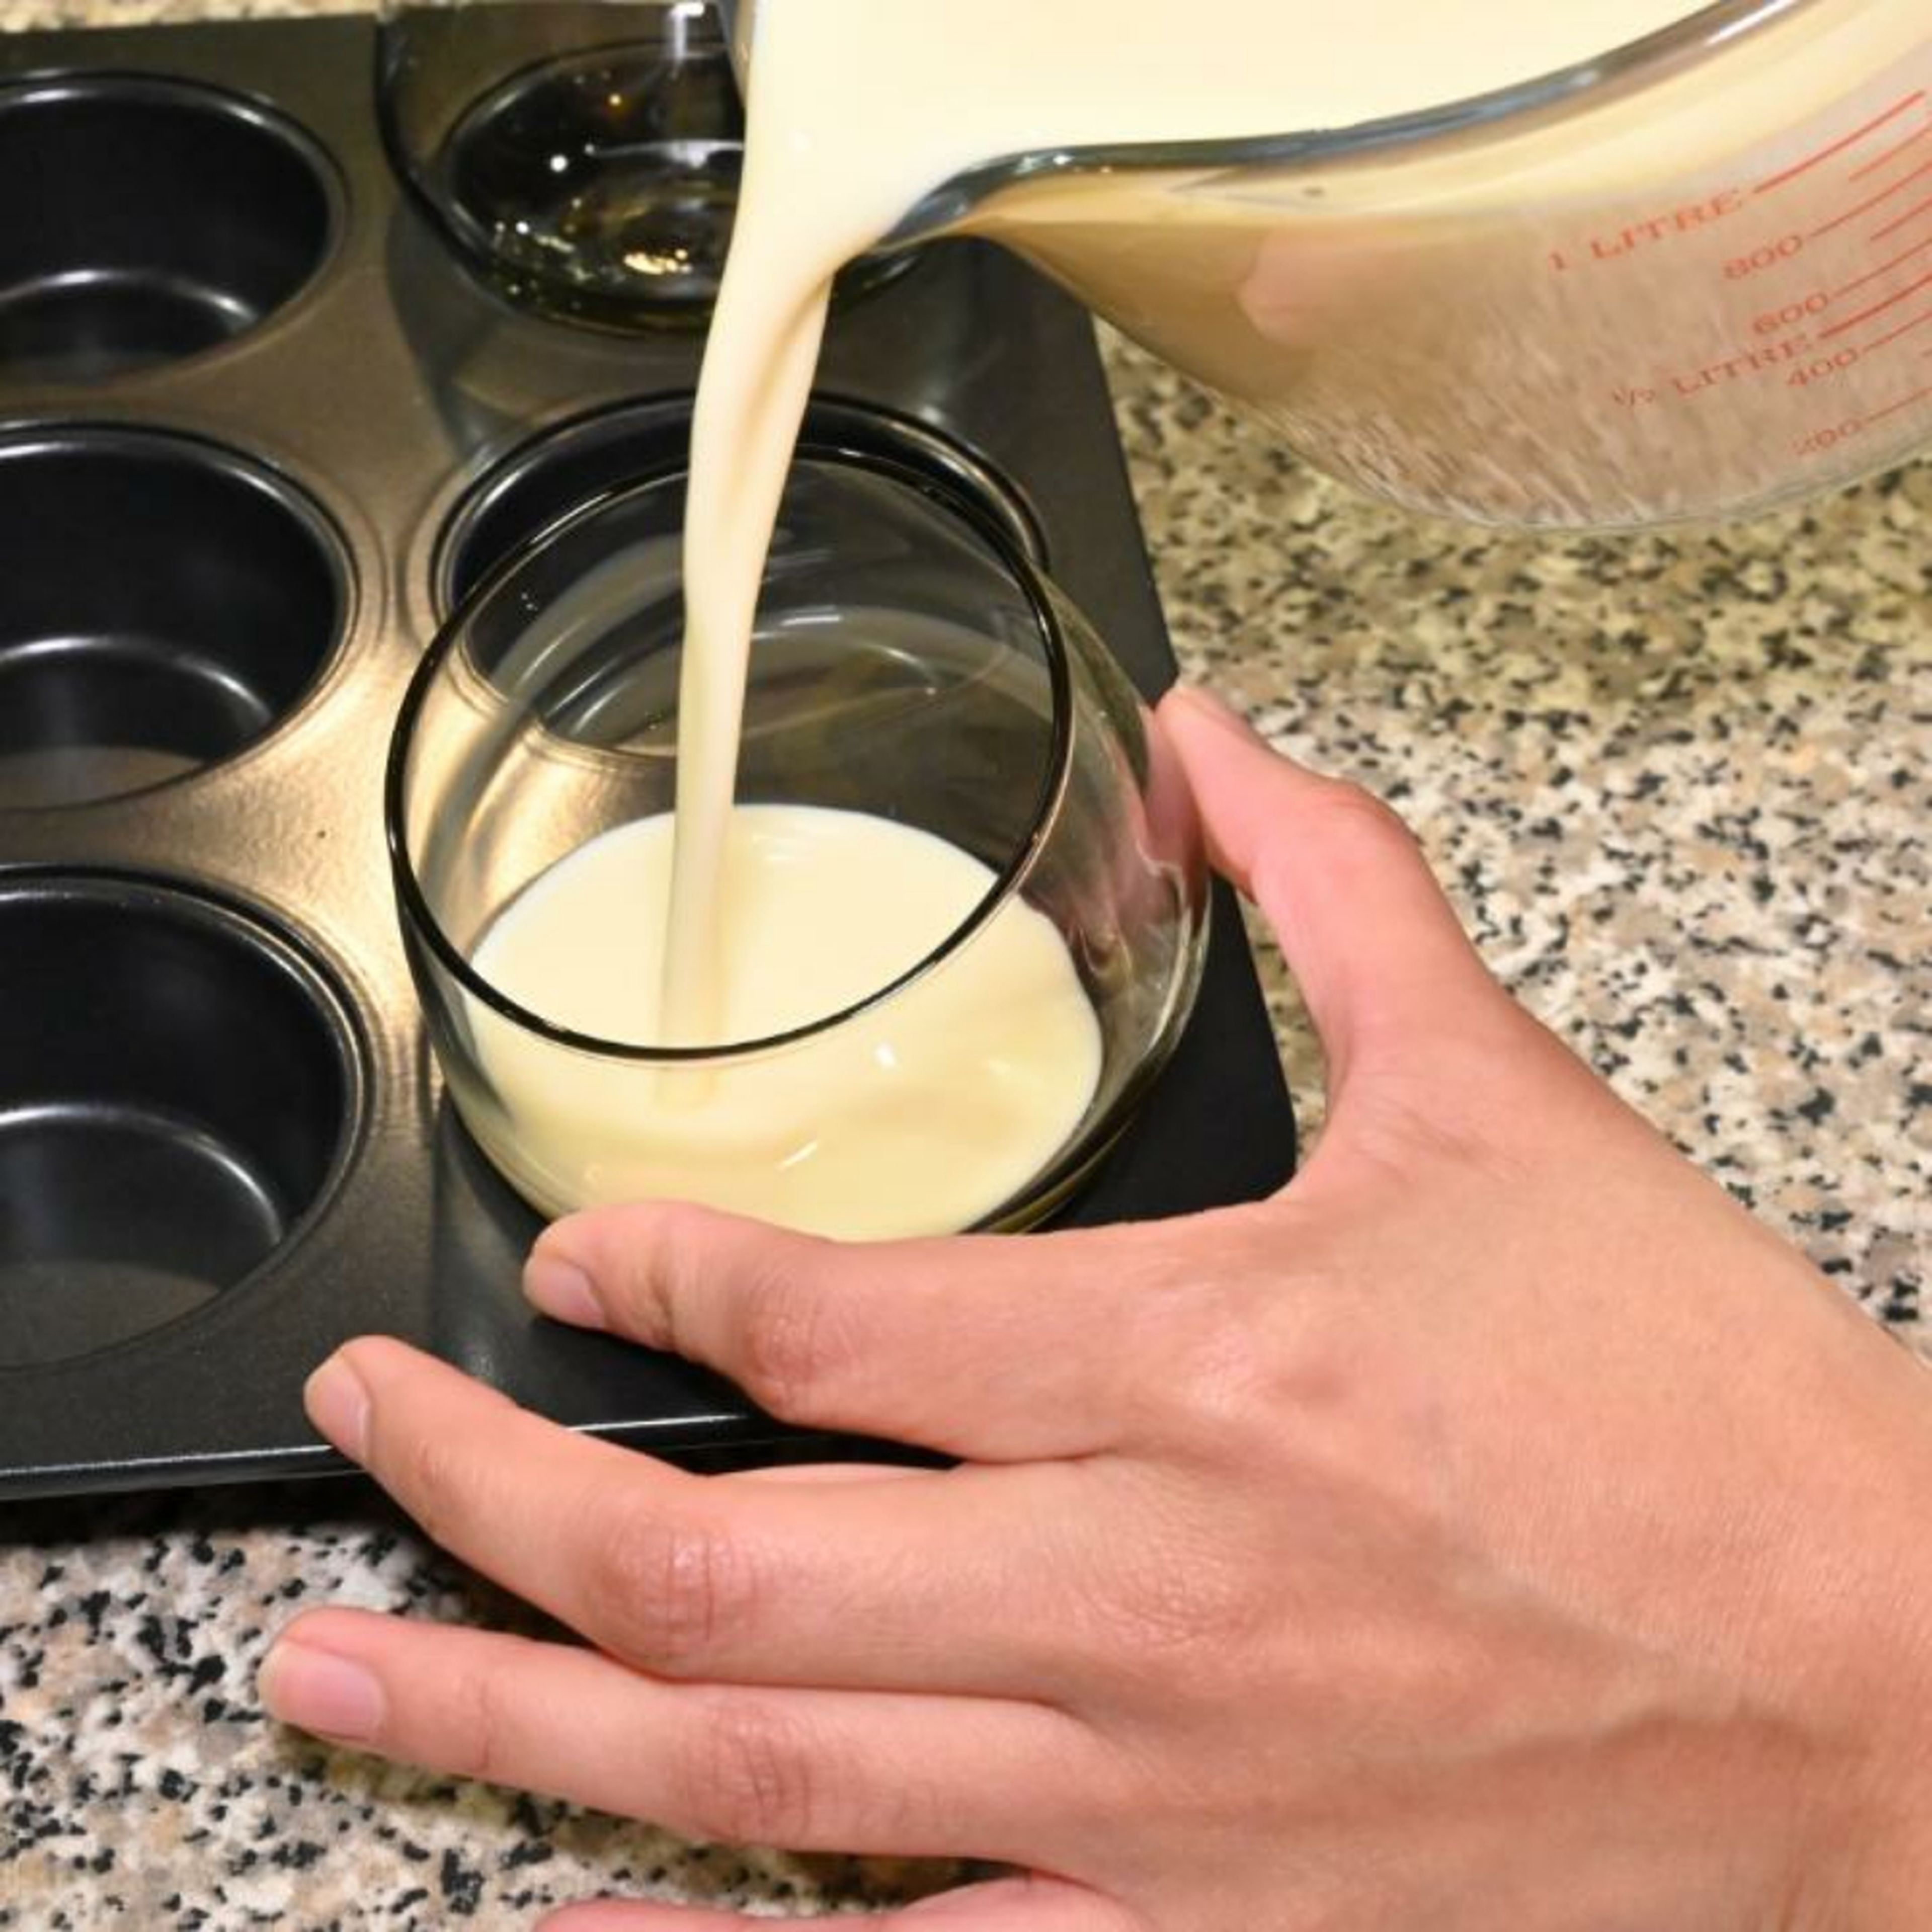 Use a muffin tray to place the dessert cups. 
When pouring the cream mixture into the cup, hold the cup slightly diagonally—pouring the mixture at an angle.